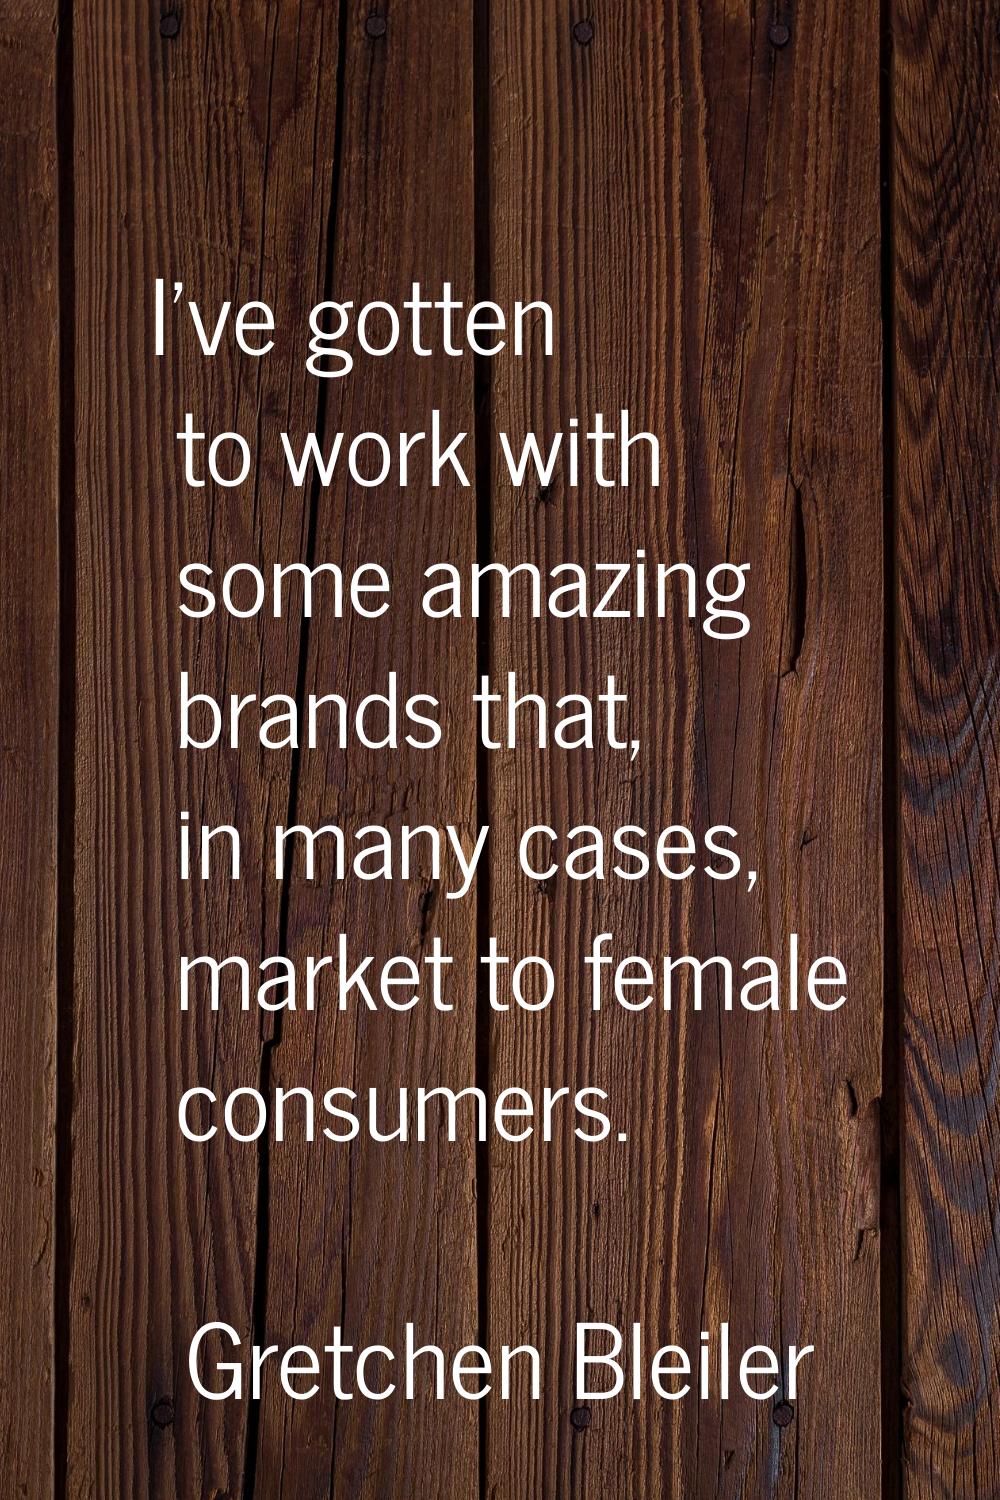 I've gotten to work with some amazing brands that, in many cases, market to female consumers.